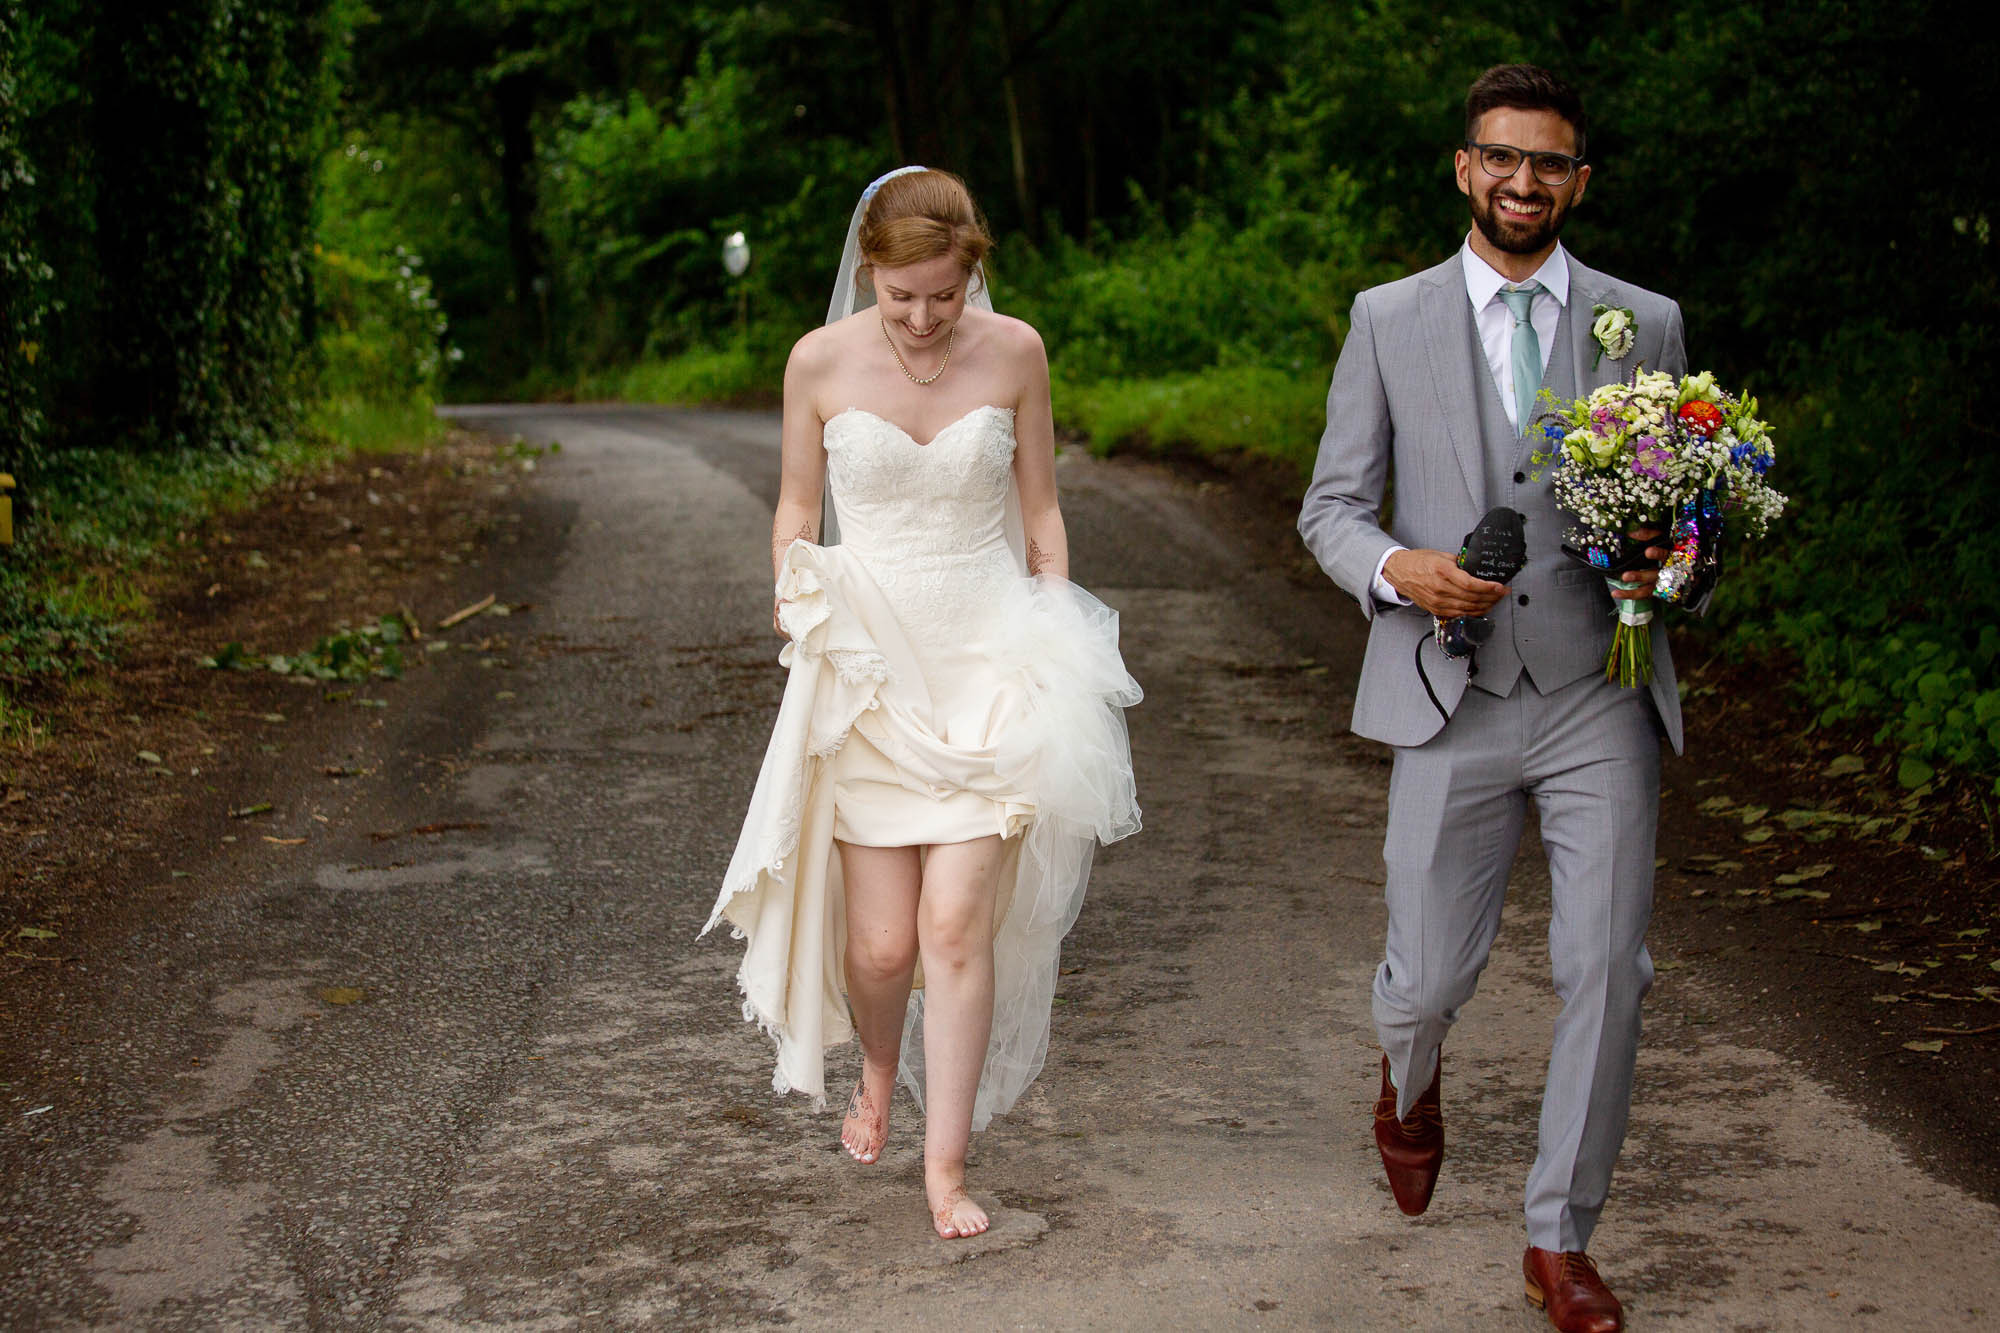 Hannah and Zak's Aldwick Estate wedding captured by Martin Dabek Photography.